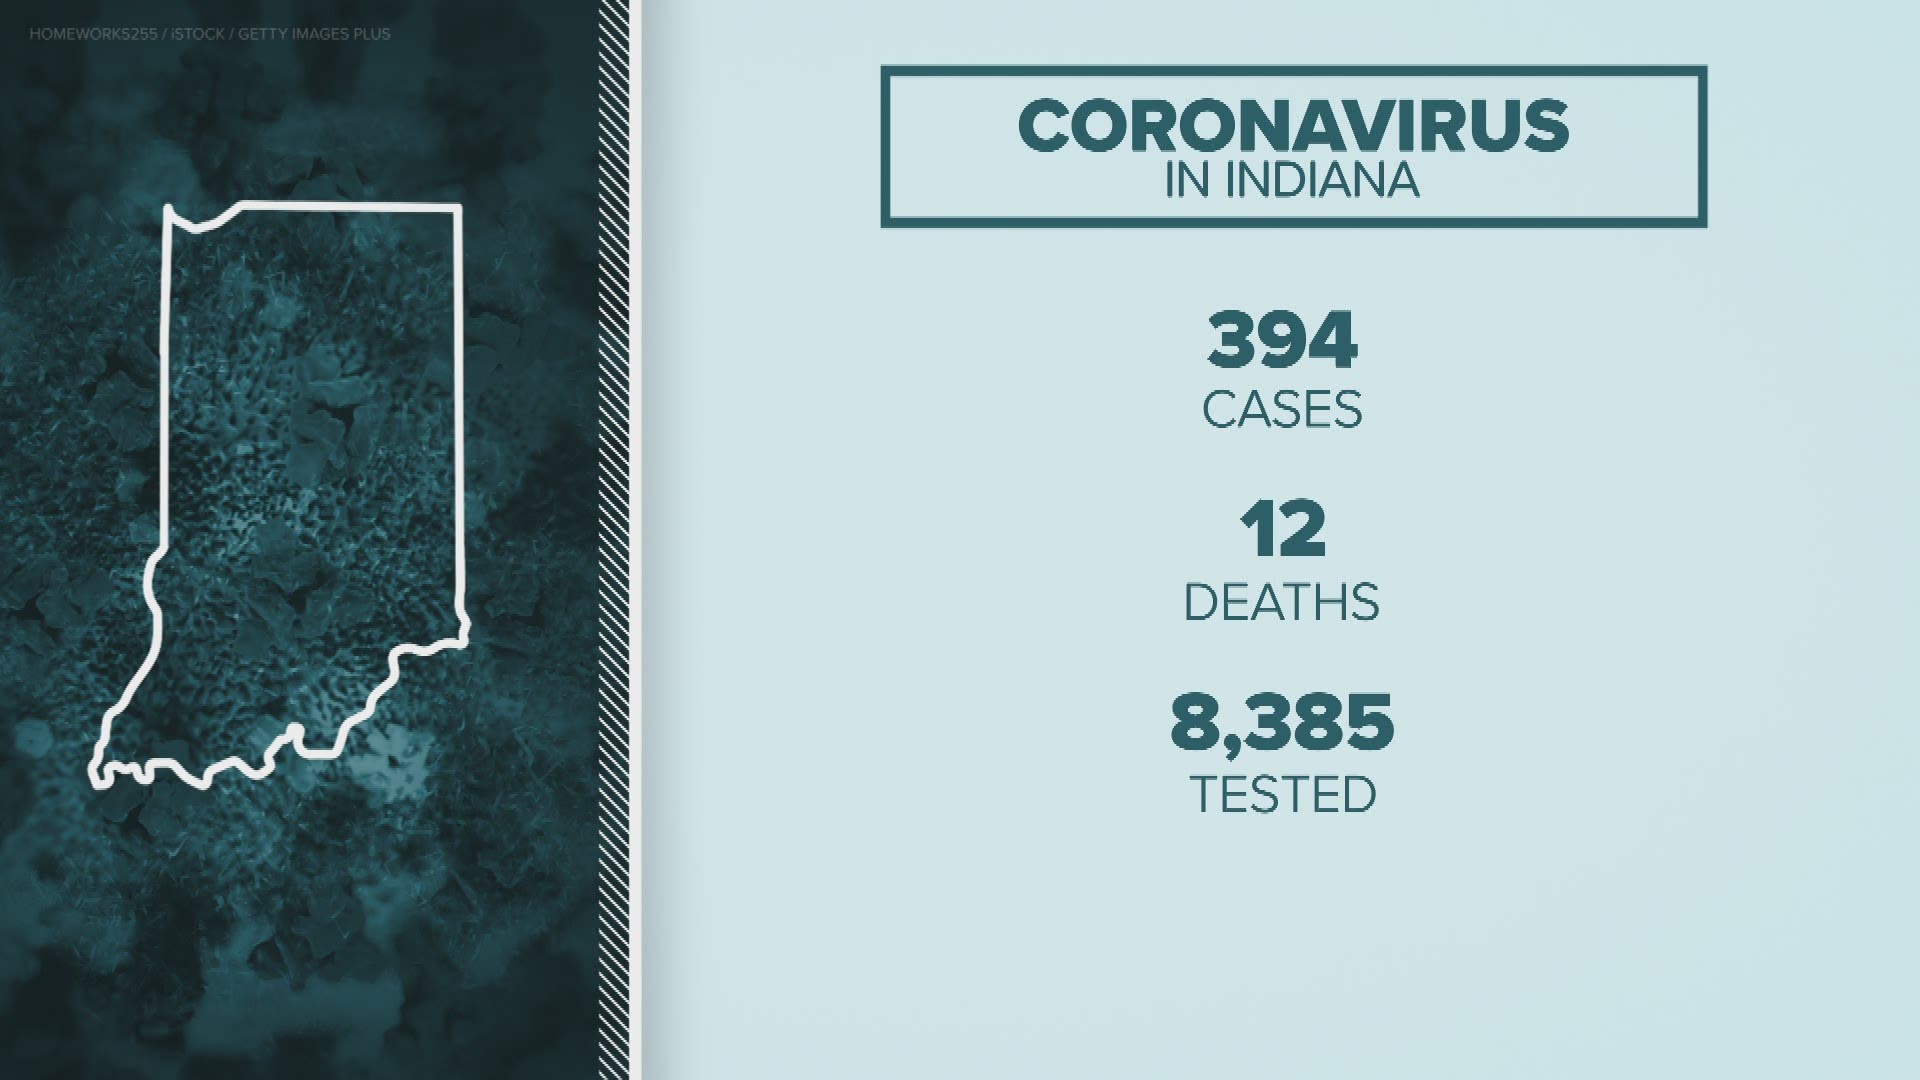 The state reported 394 more COVID-19 cases today.